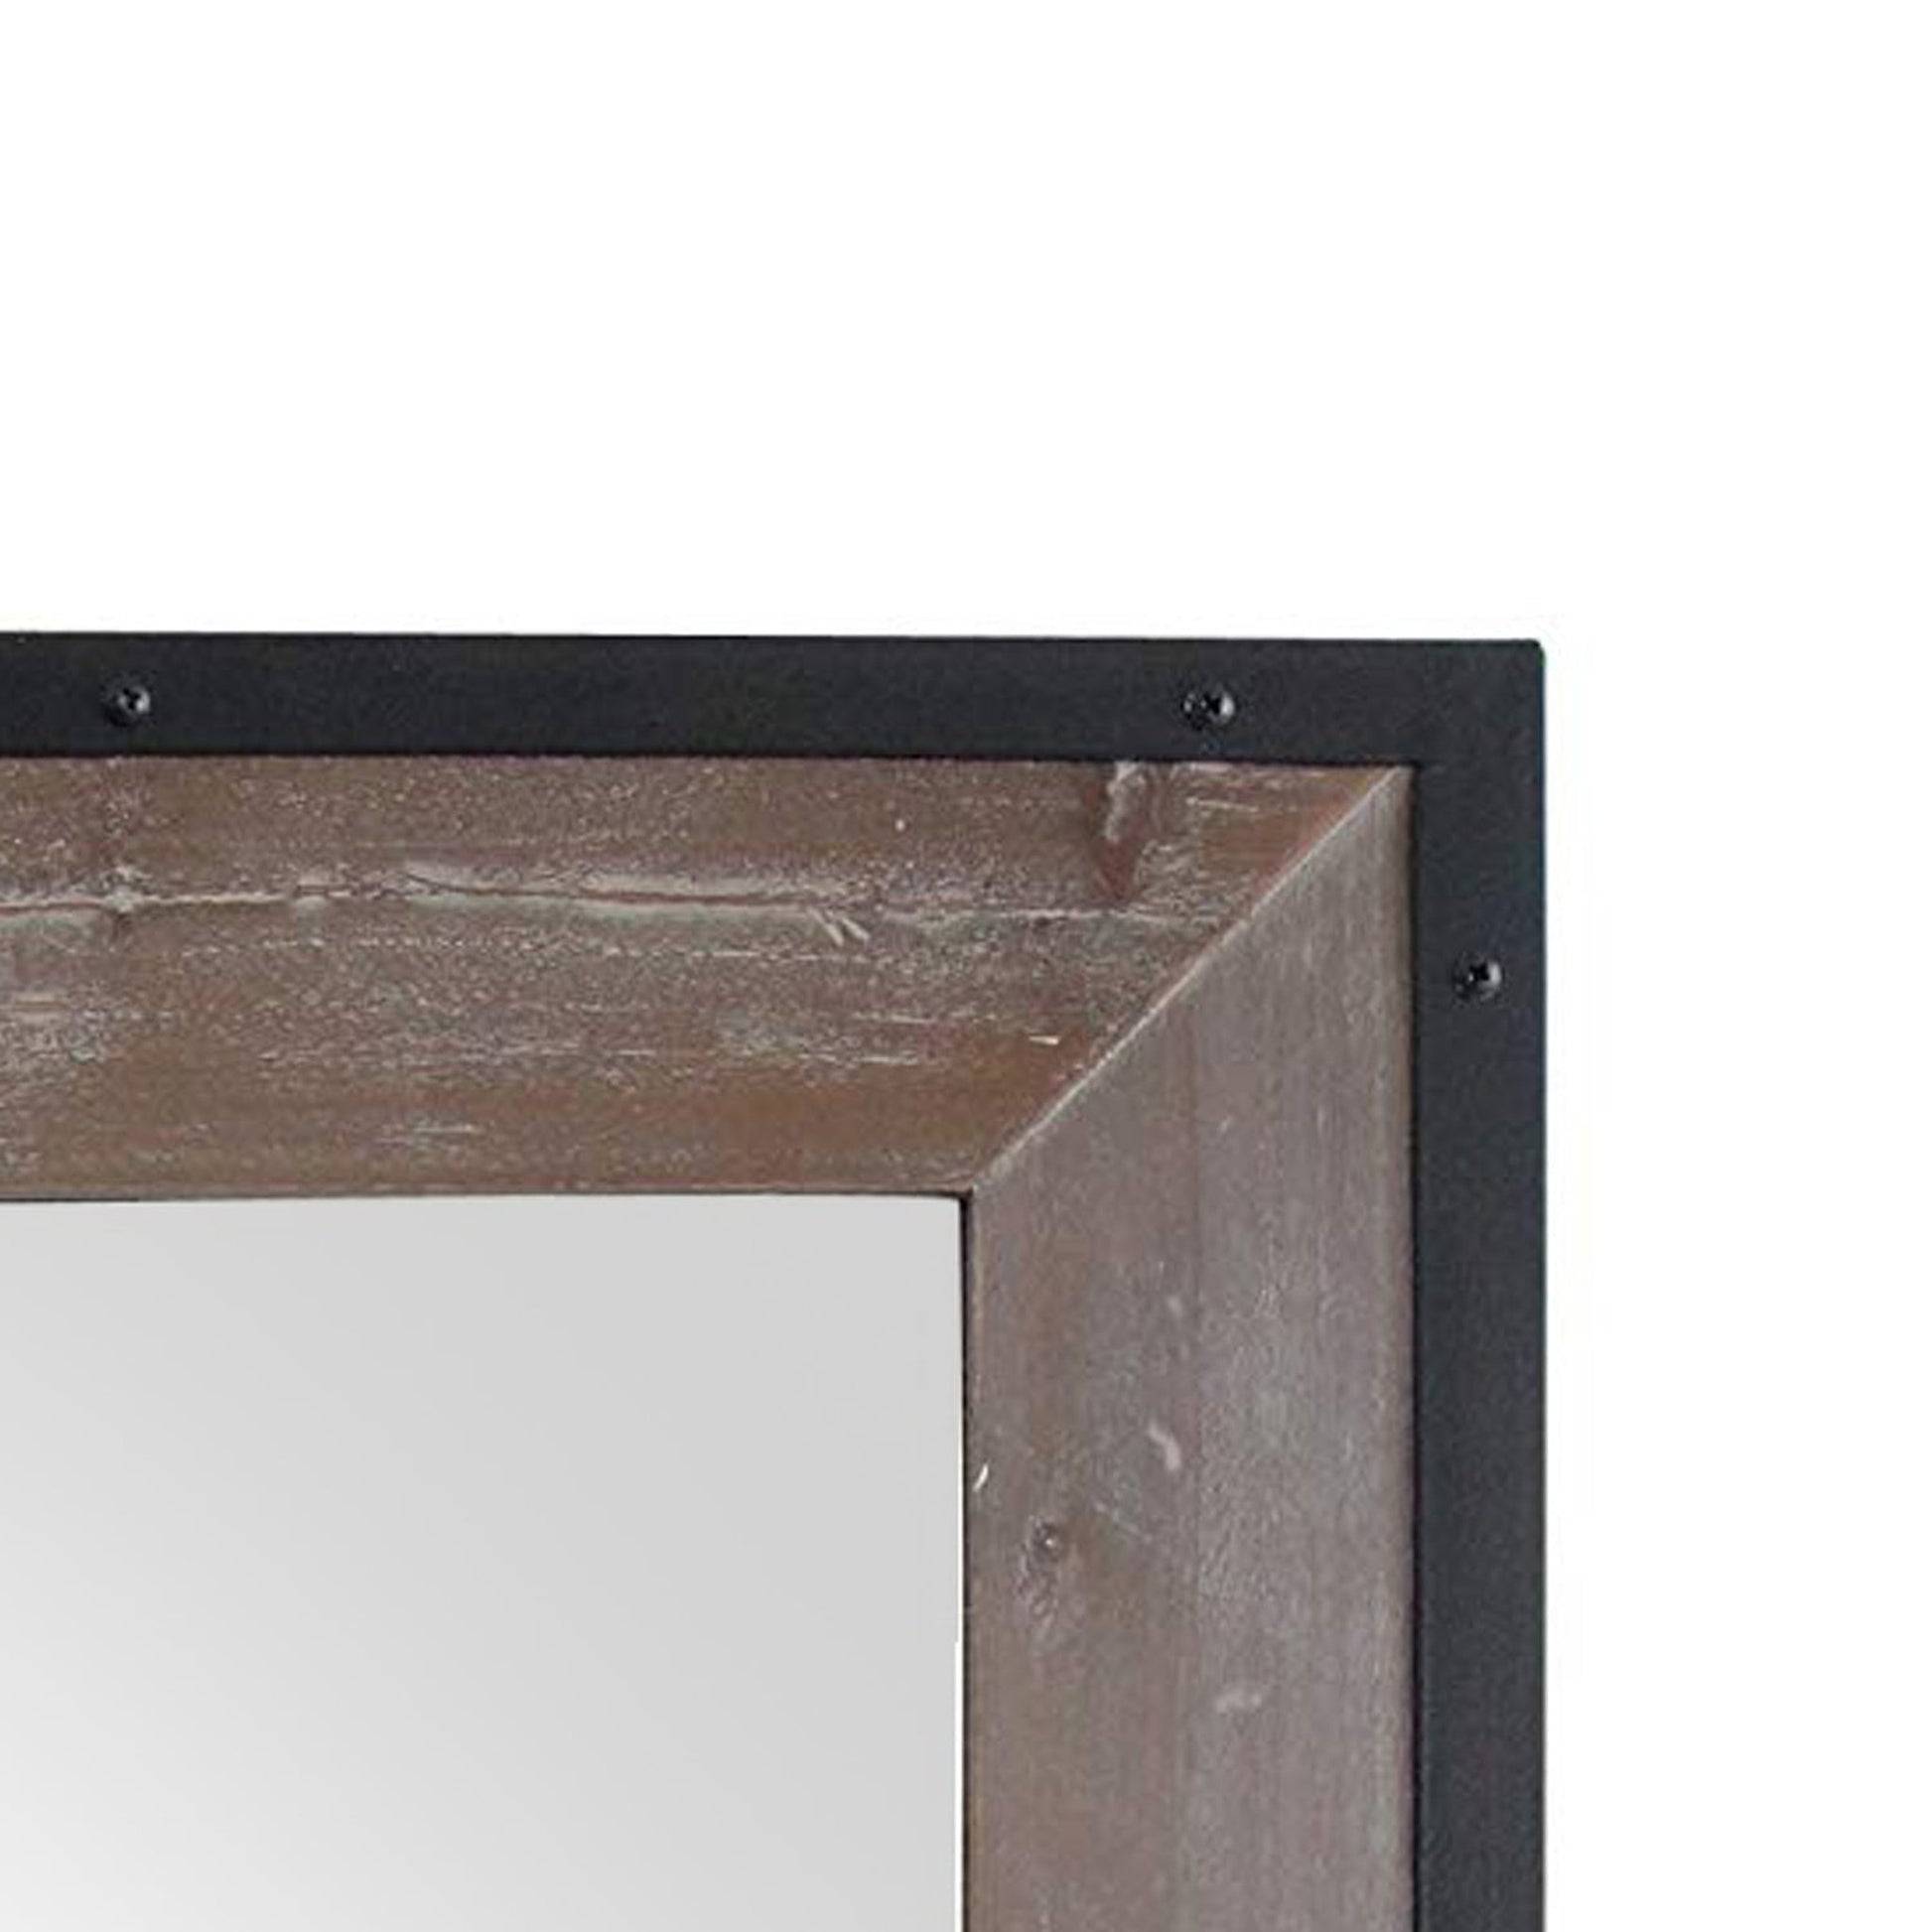 Benzara Black and Brown Rectangular Transitional Mirror With Wooden Framing and Metal Outline